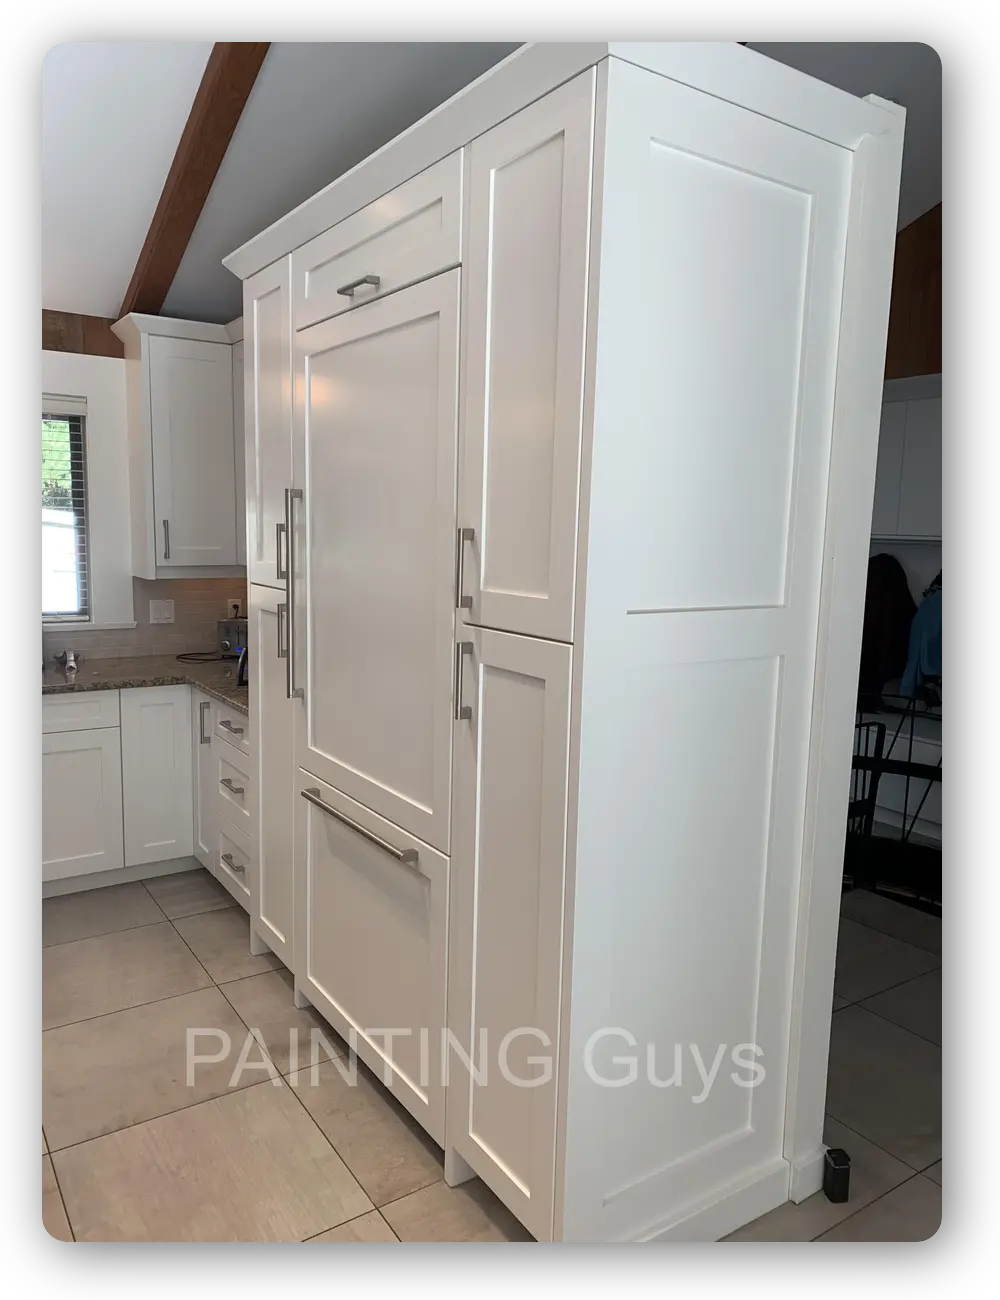 Painting a built-in refrigerator - PAINTING Guys